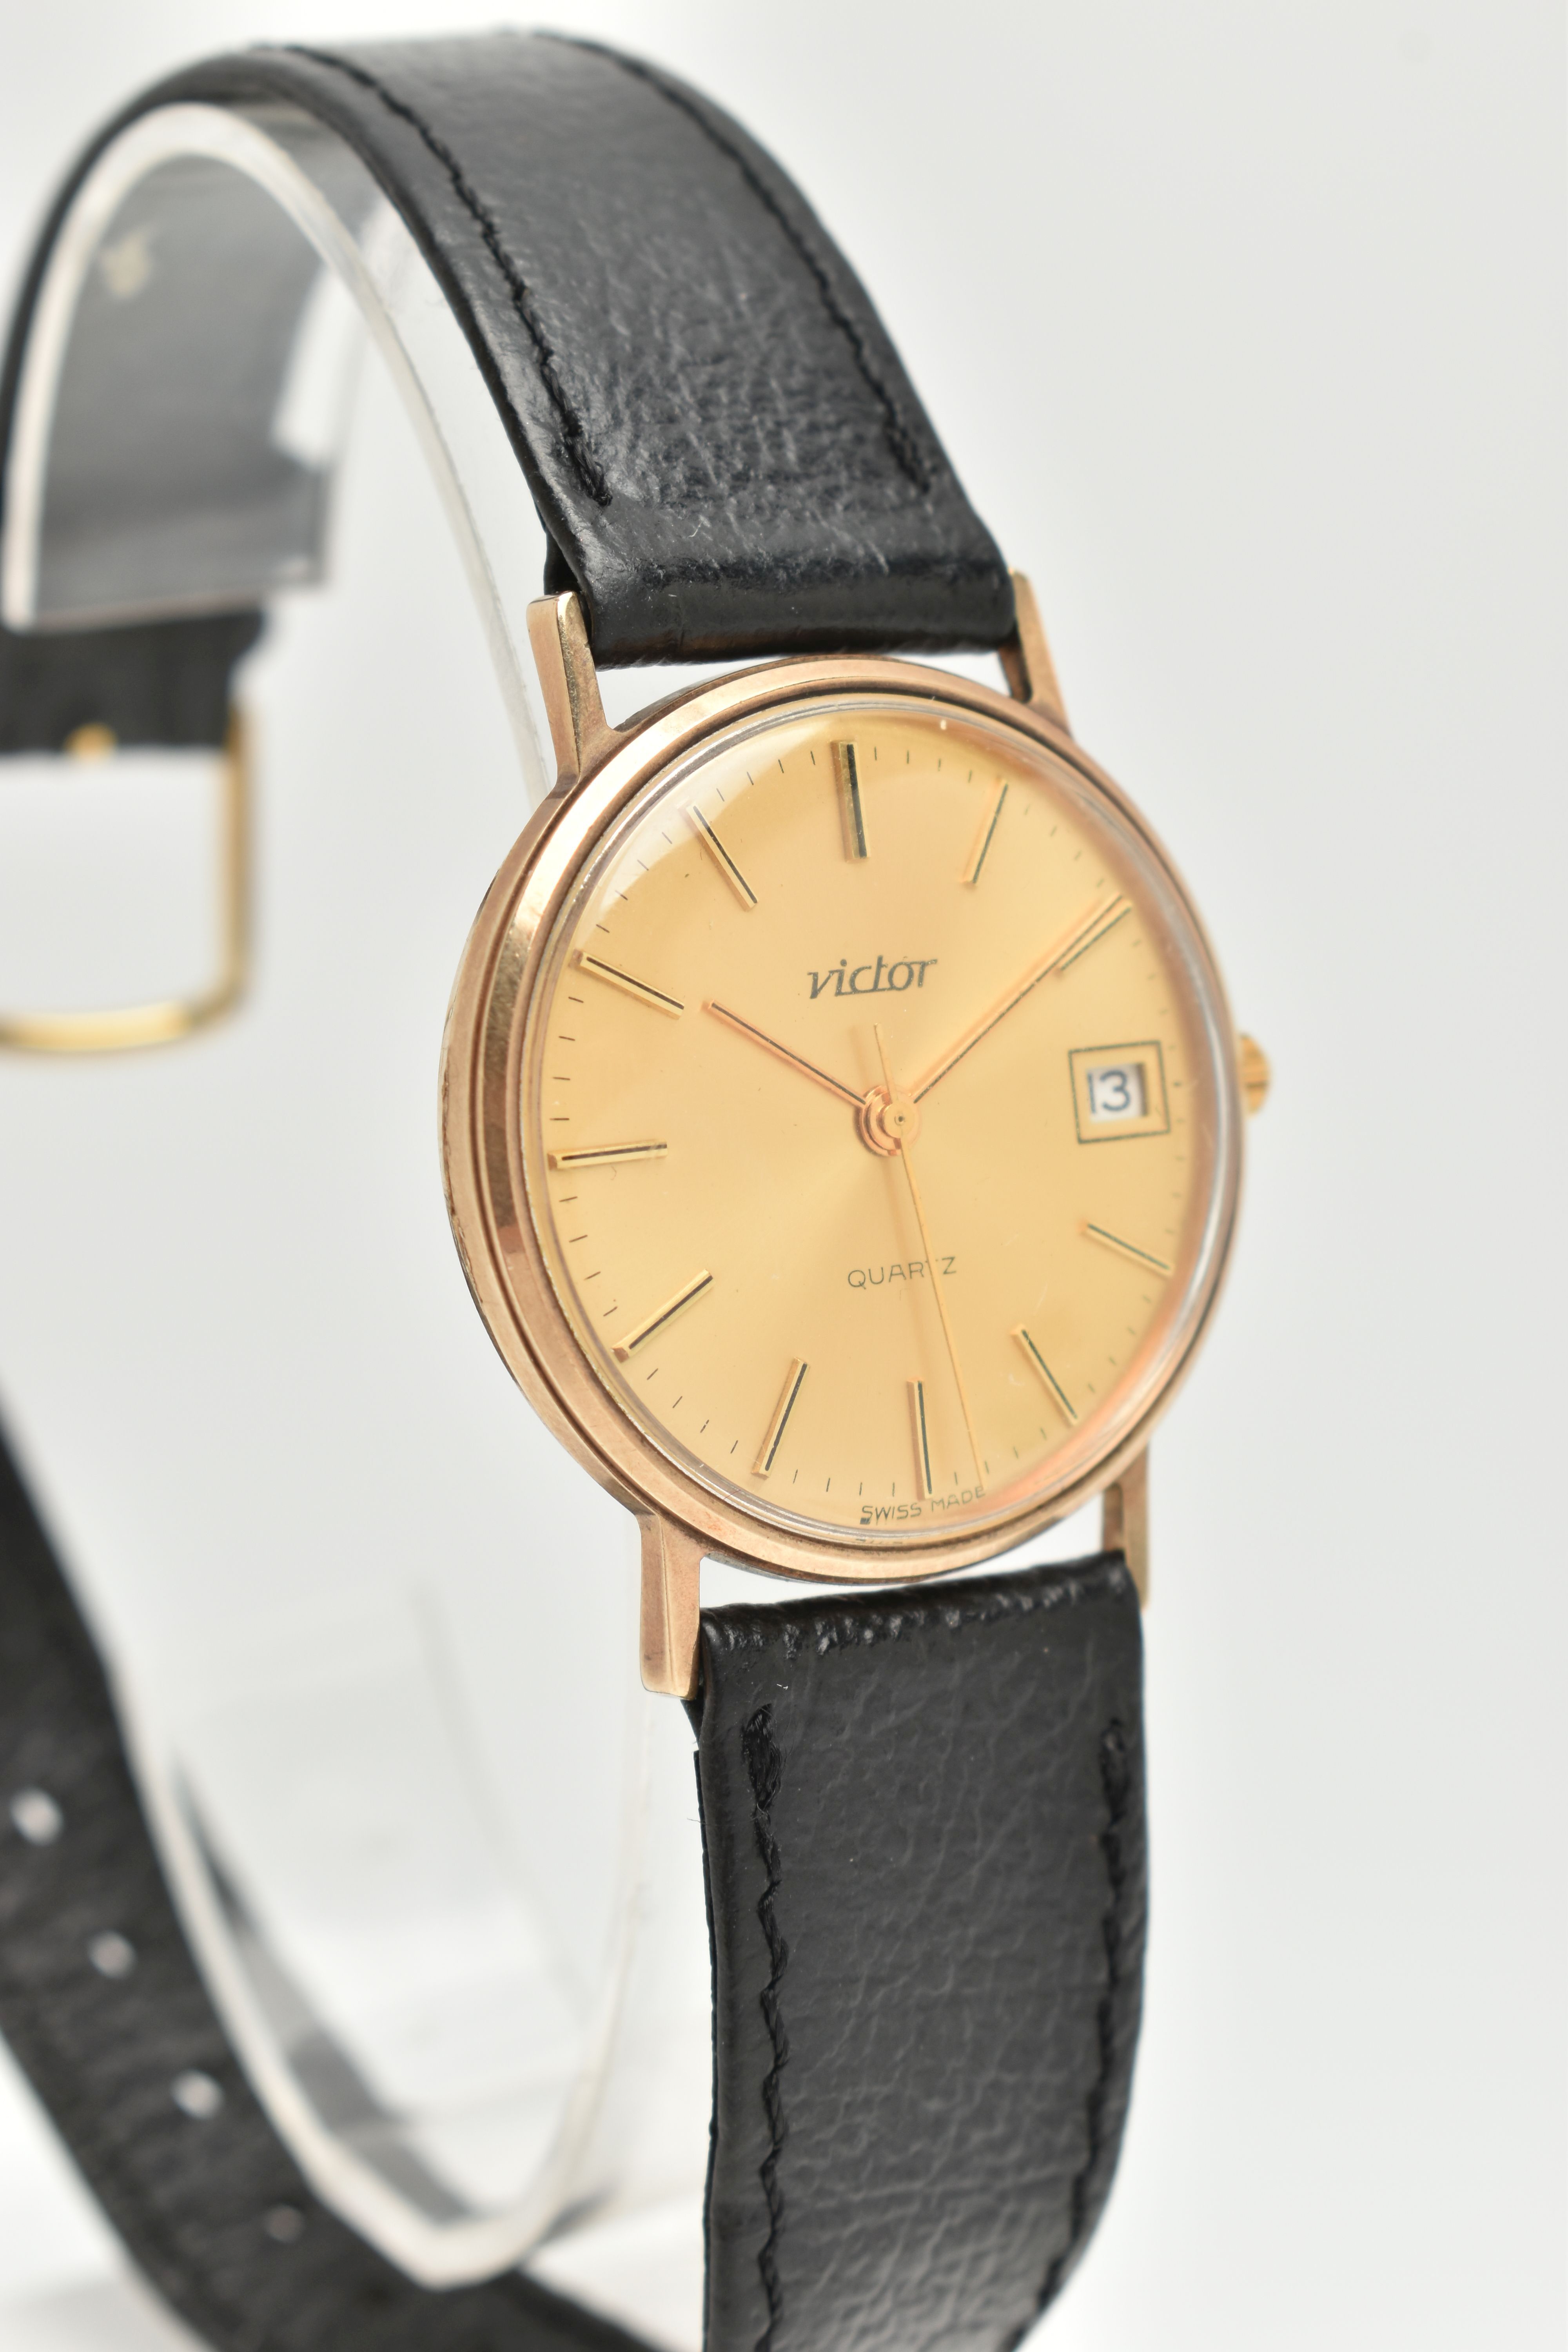 A GENTS 9CT 'VICTOR' WRISTWATCH, quartz movement, round gold dial signed 'Victor', baton markers, - Image 2 of 6